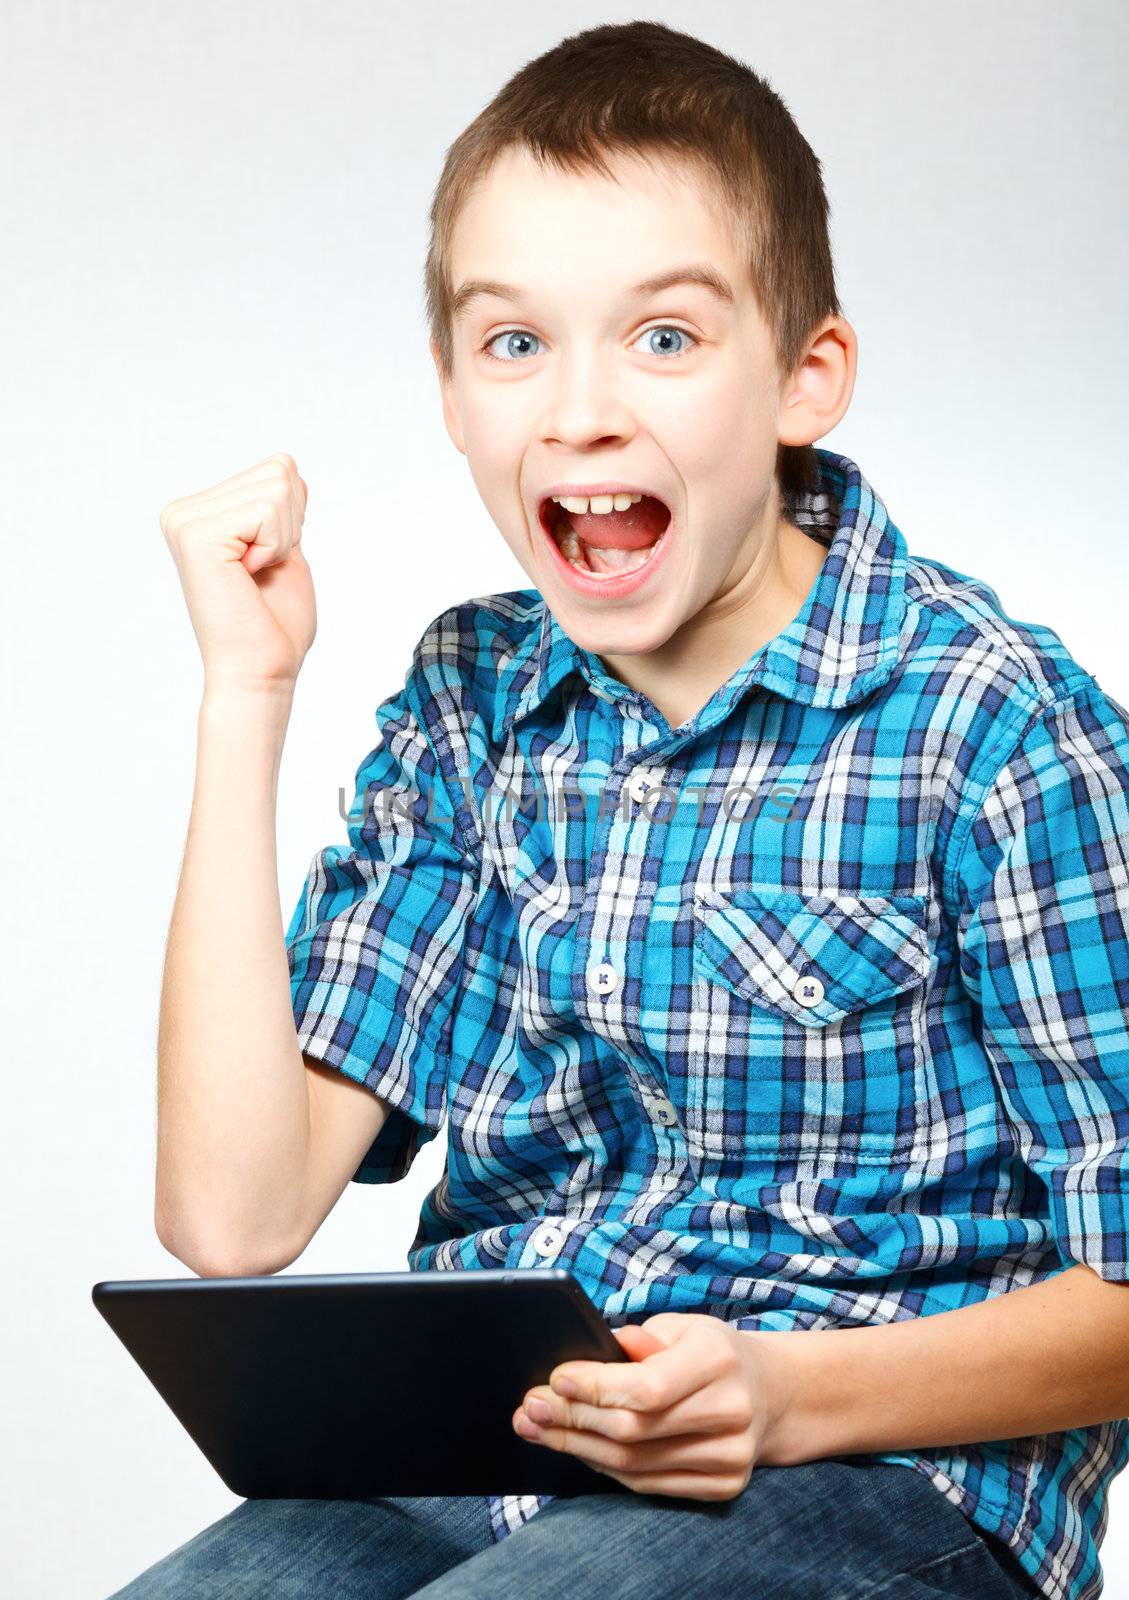 Boy cheering holding tablet computer by naumoid